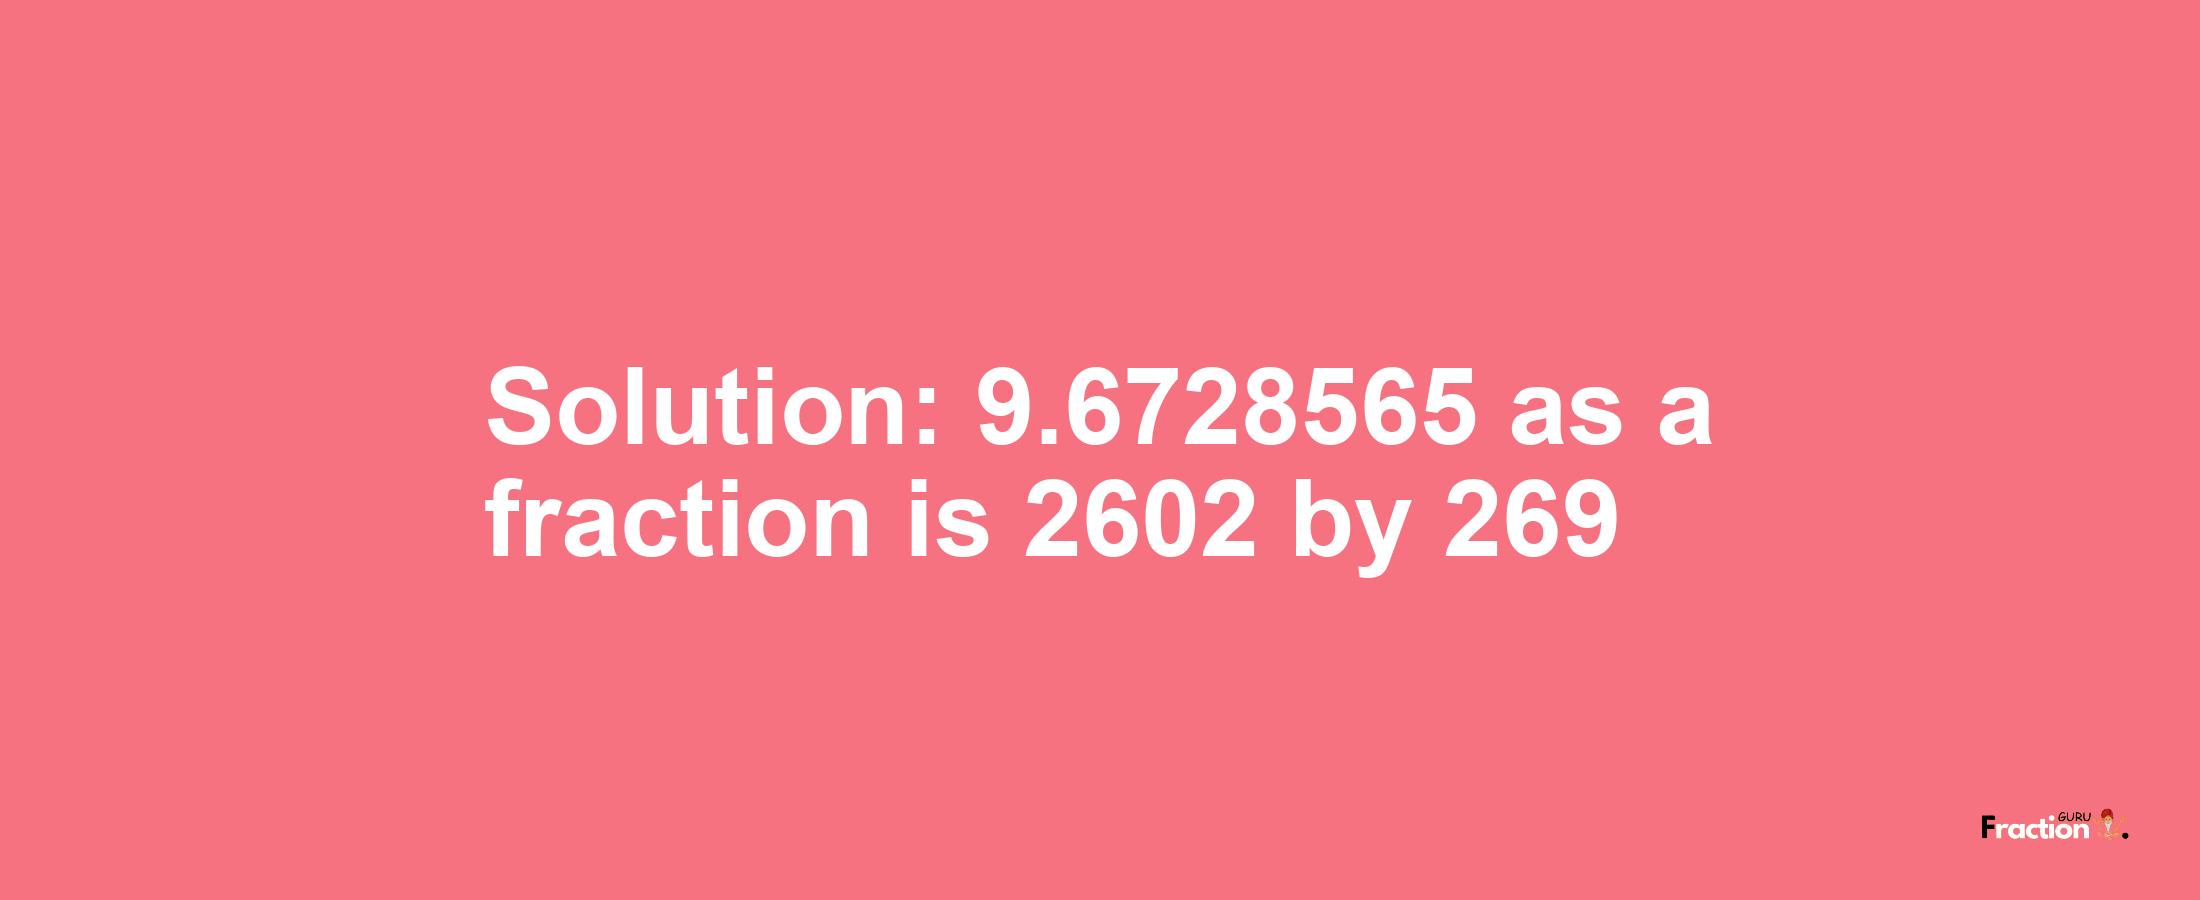 Solution:9.6728565 as a fraction is 2602/269